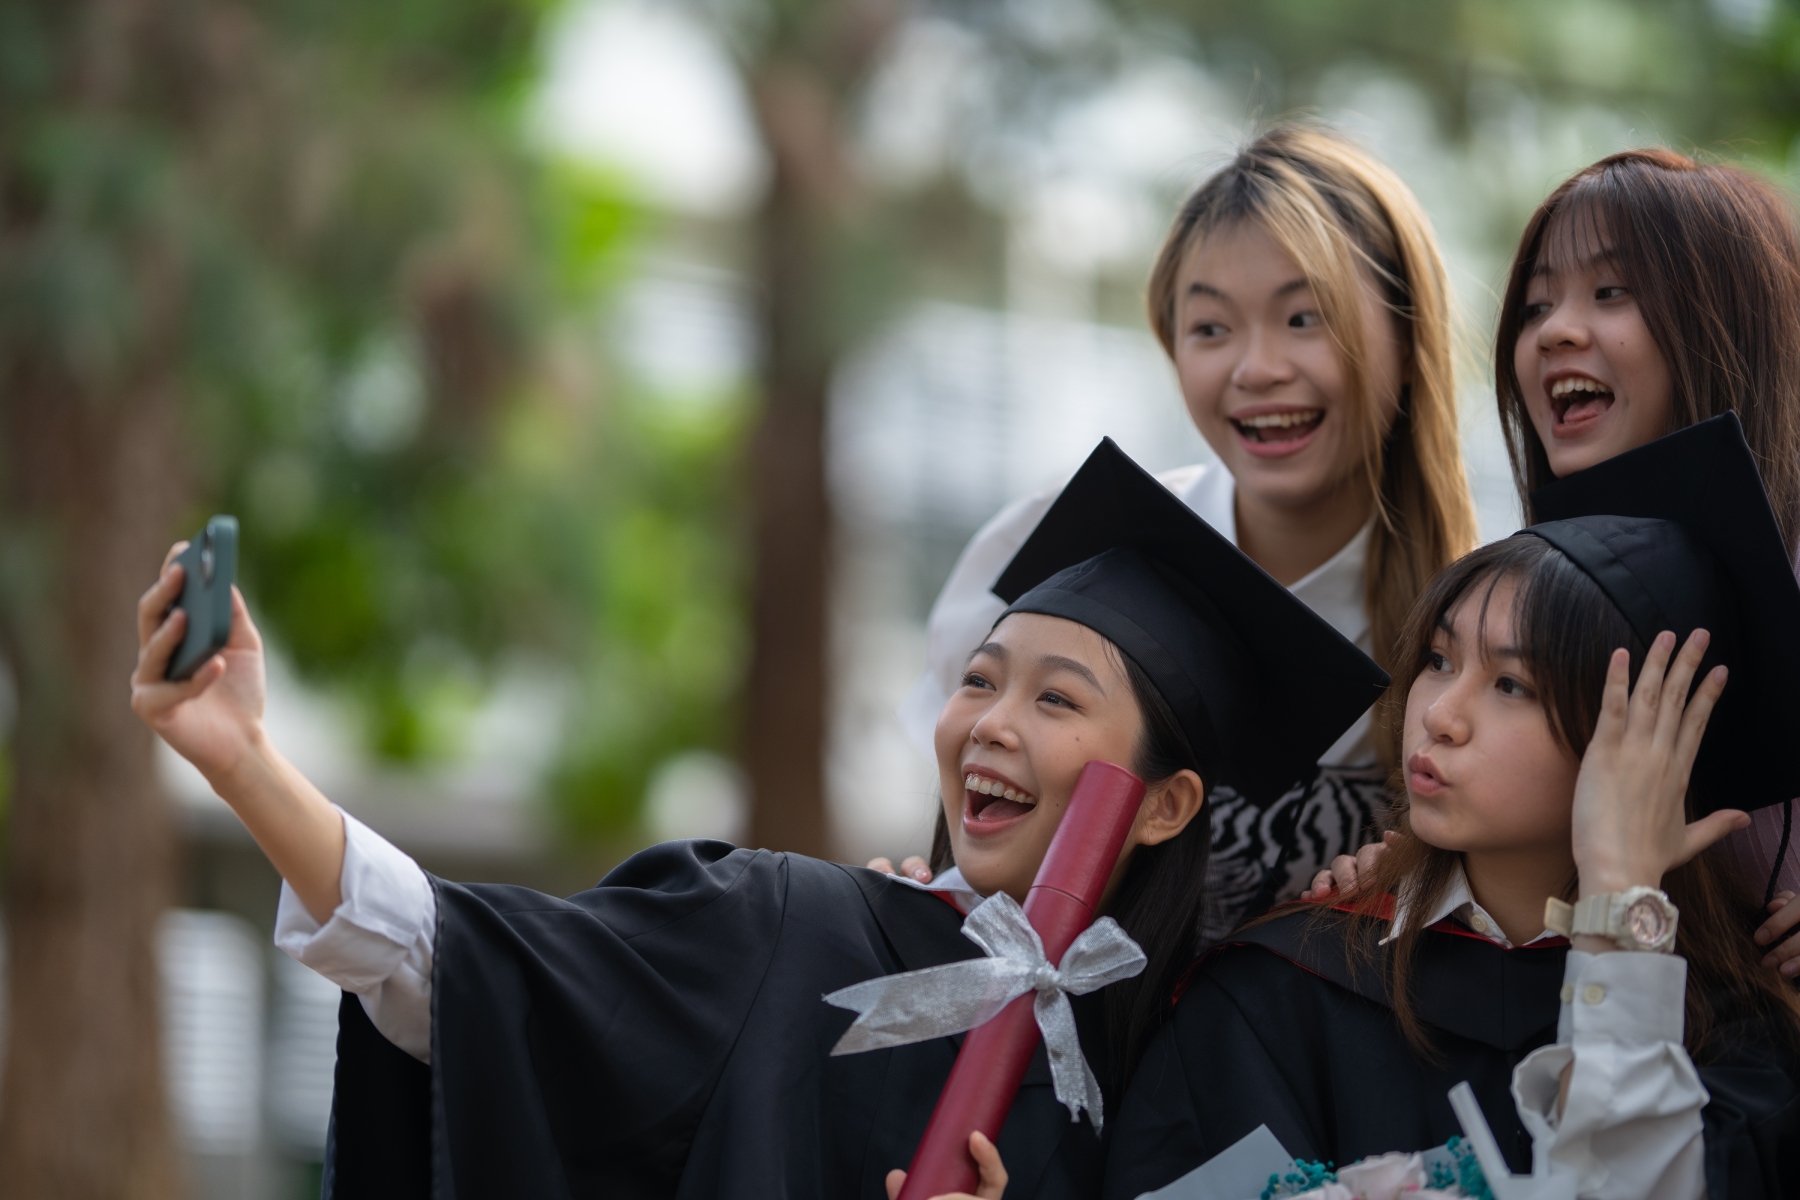 Graduant takes a funny selfie with her three friends in a garden